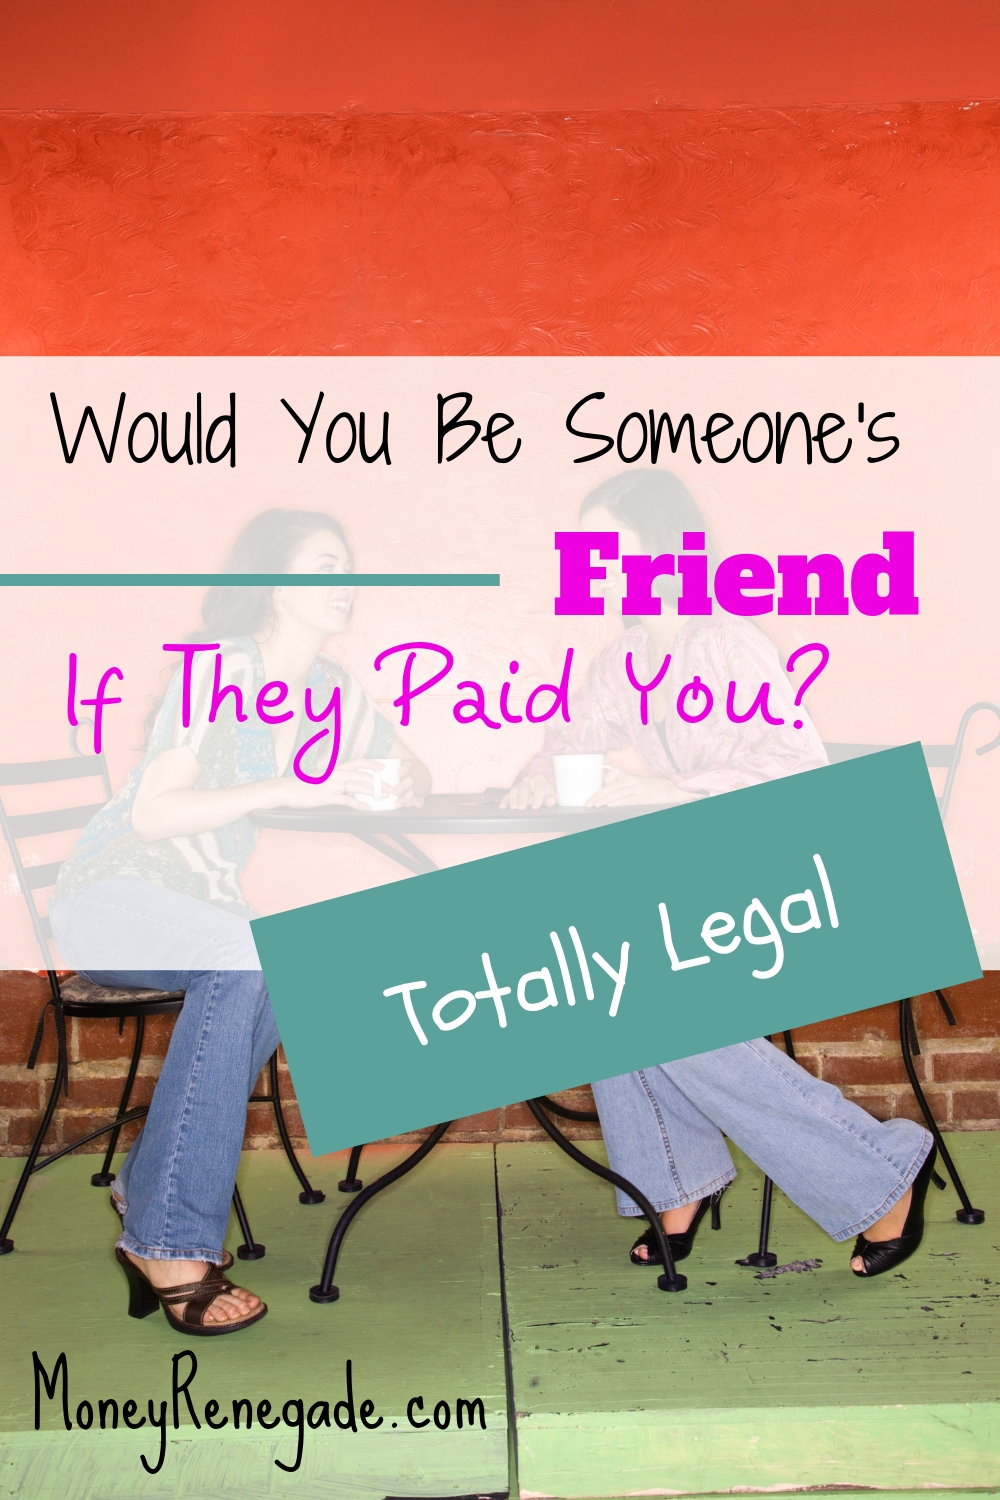 Would you be someone's friend if they paid you?